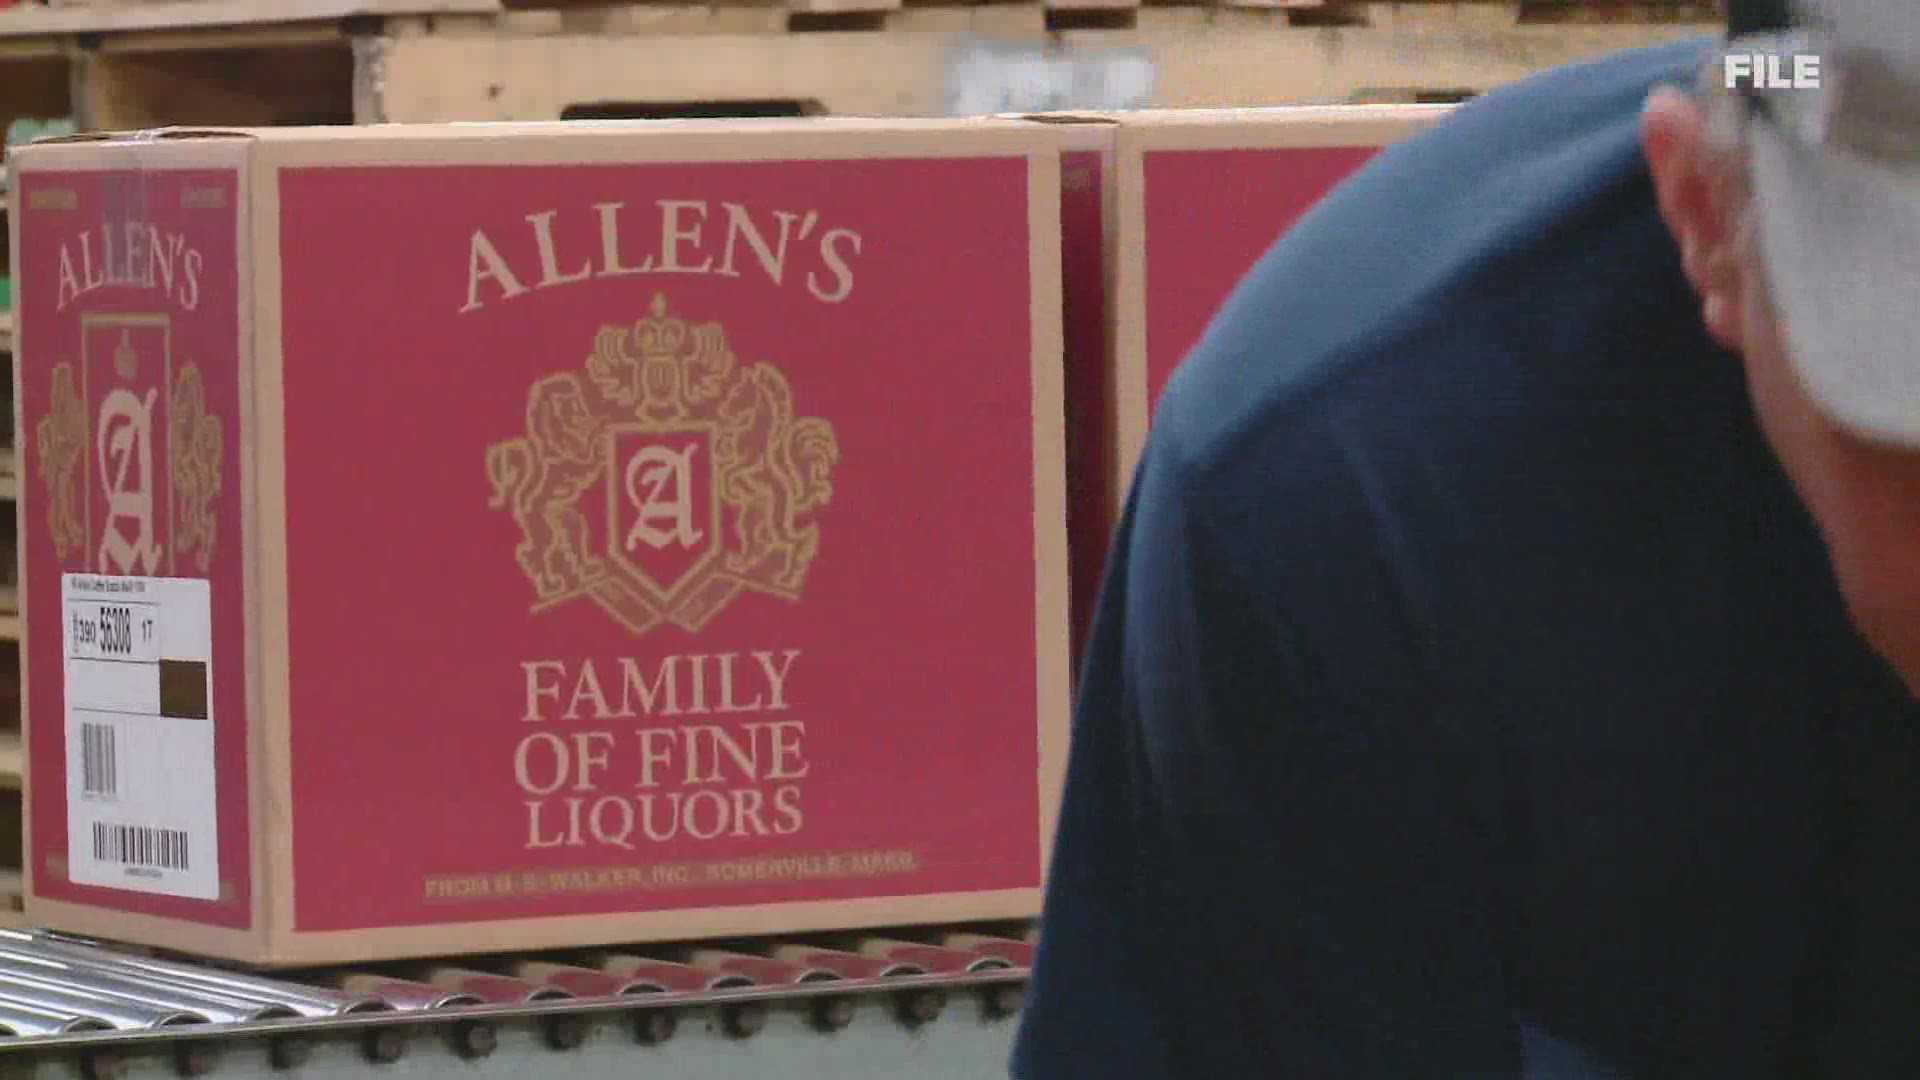 Allen's Coffee Flavored Brandy has committed a combined 50-thousand dollars to Maine charities in support of those impacted by the pandemic.